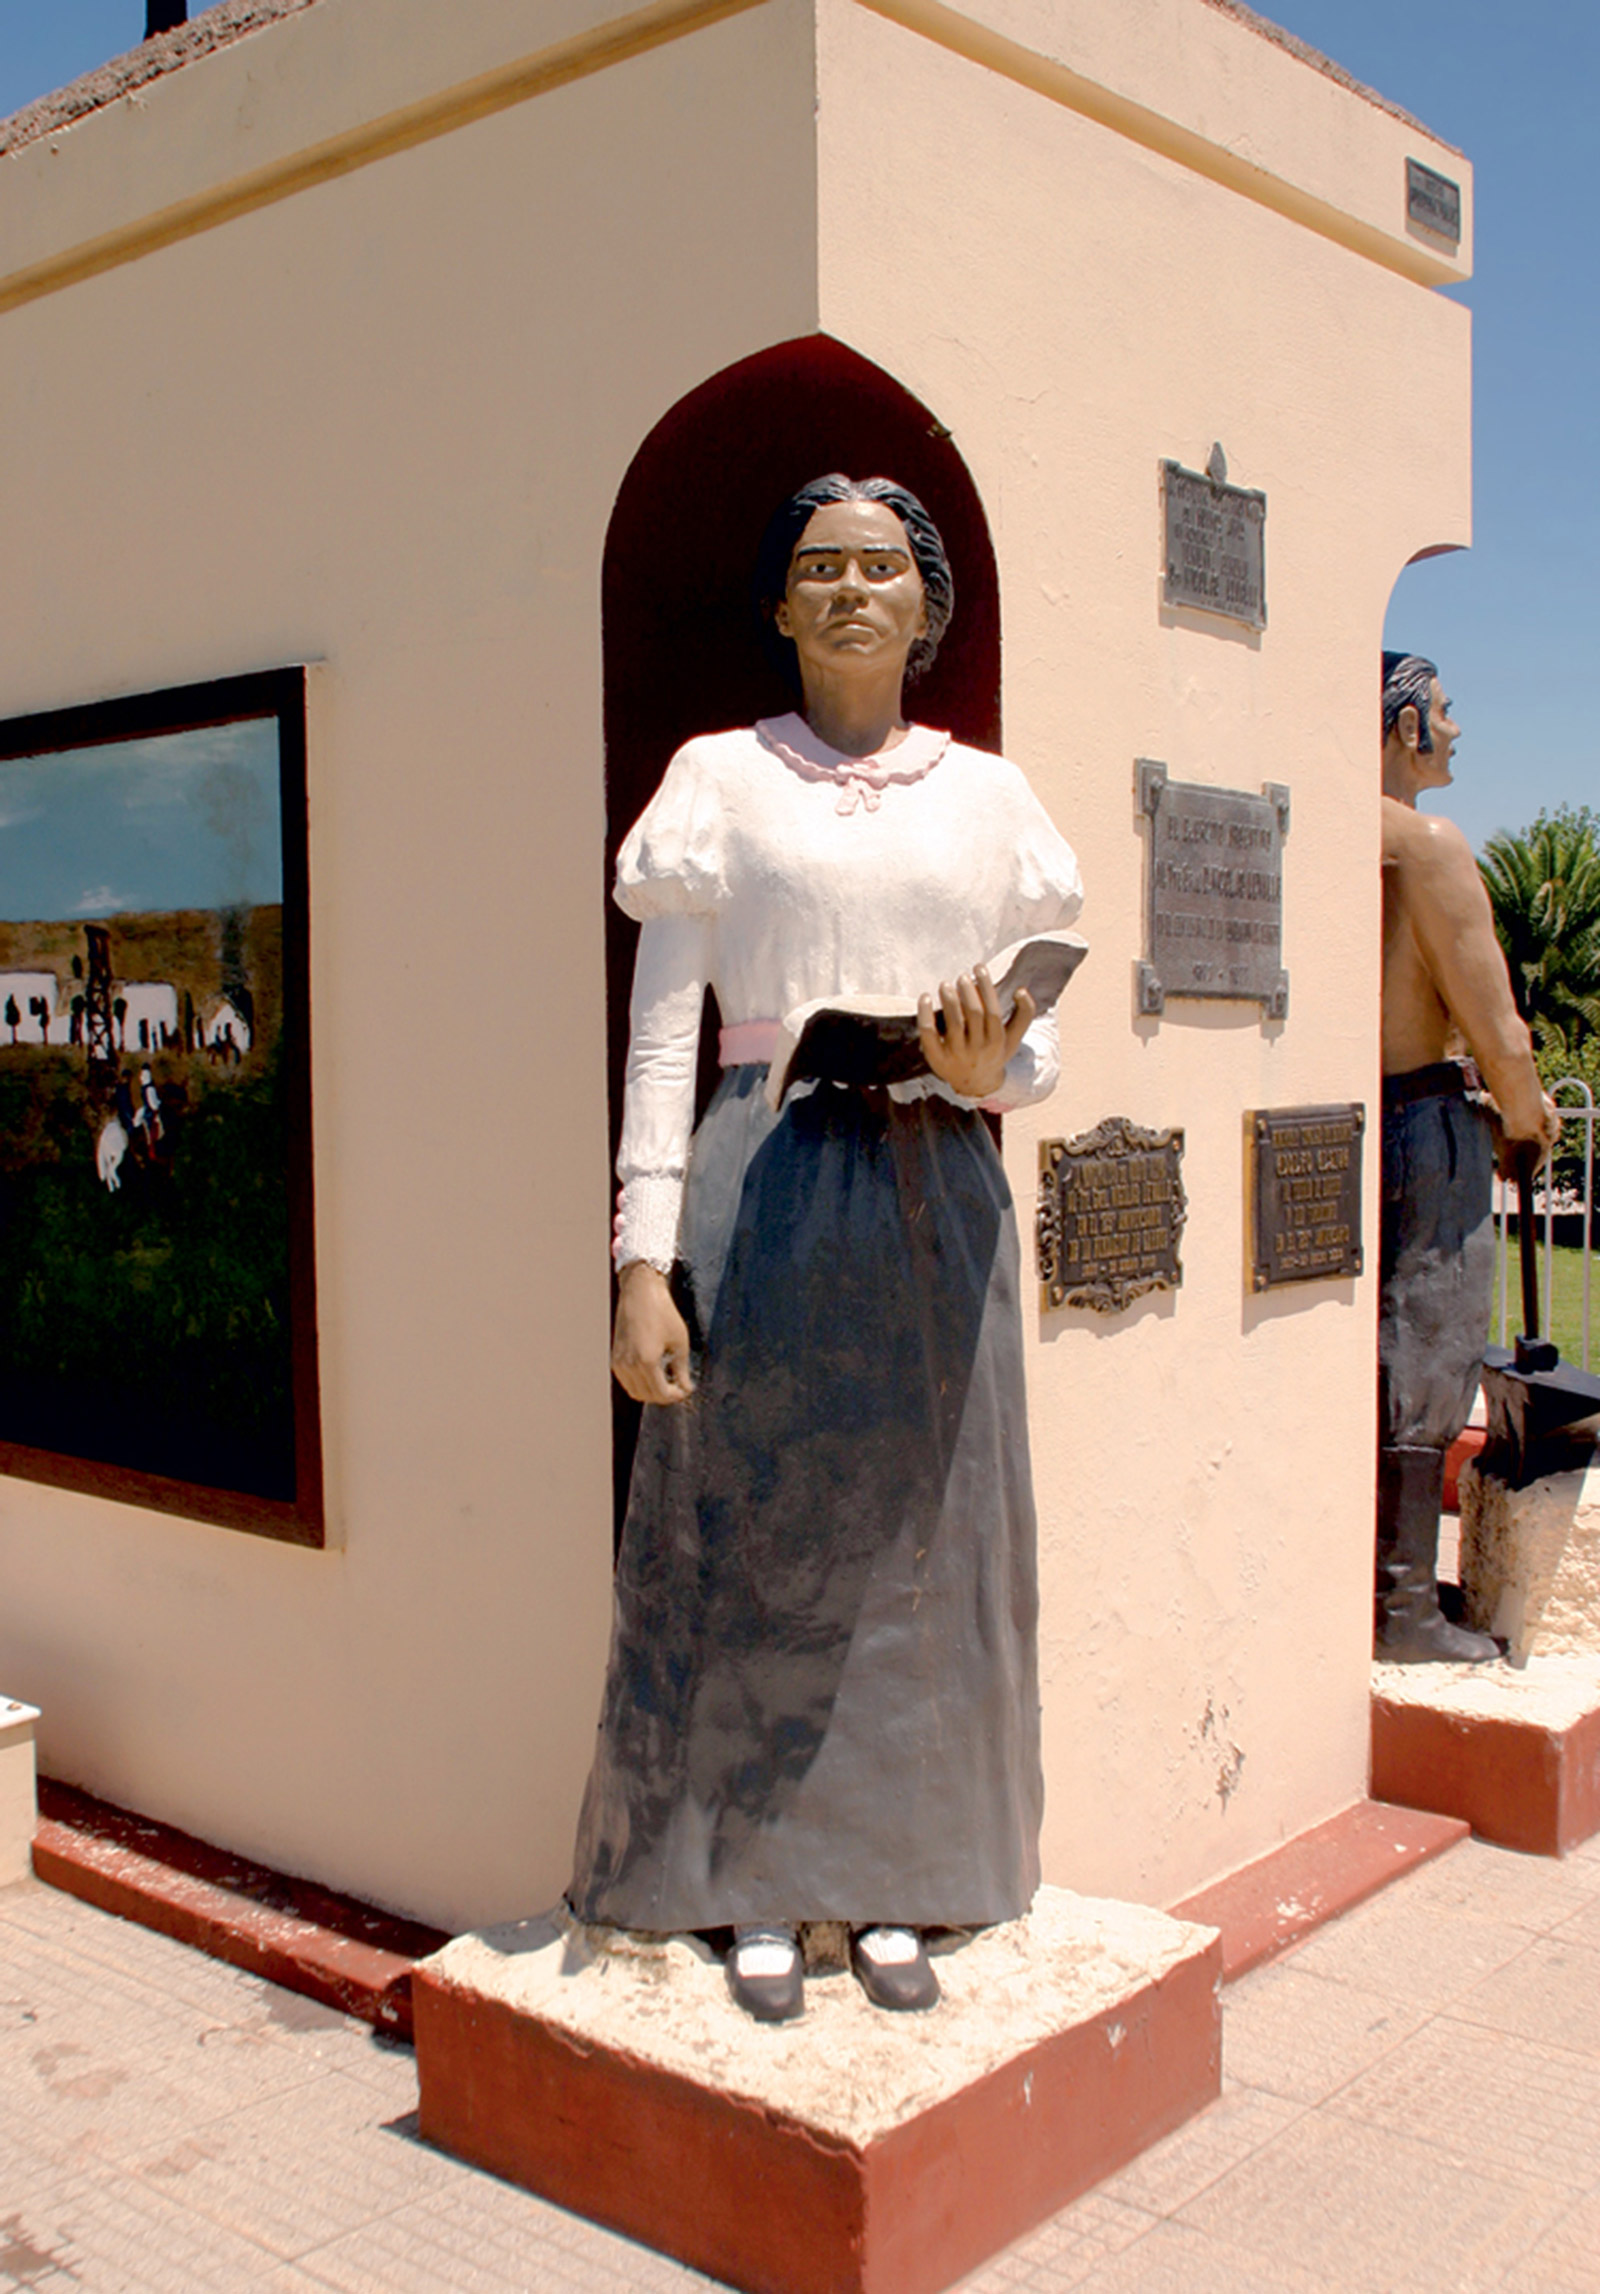 A photograph of Rodolfo Gómez Fernández’s “Monument to General Levalle” in Carhué, Argentina. 